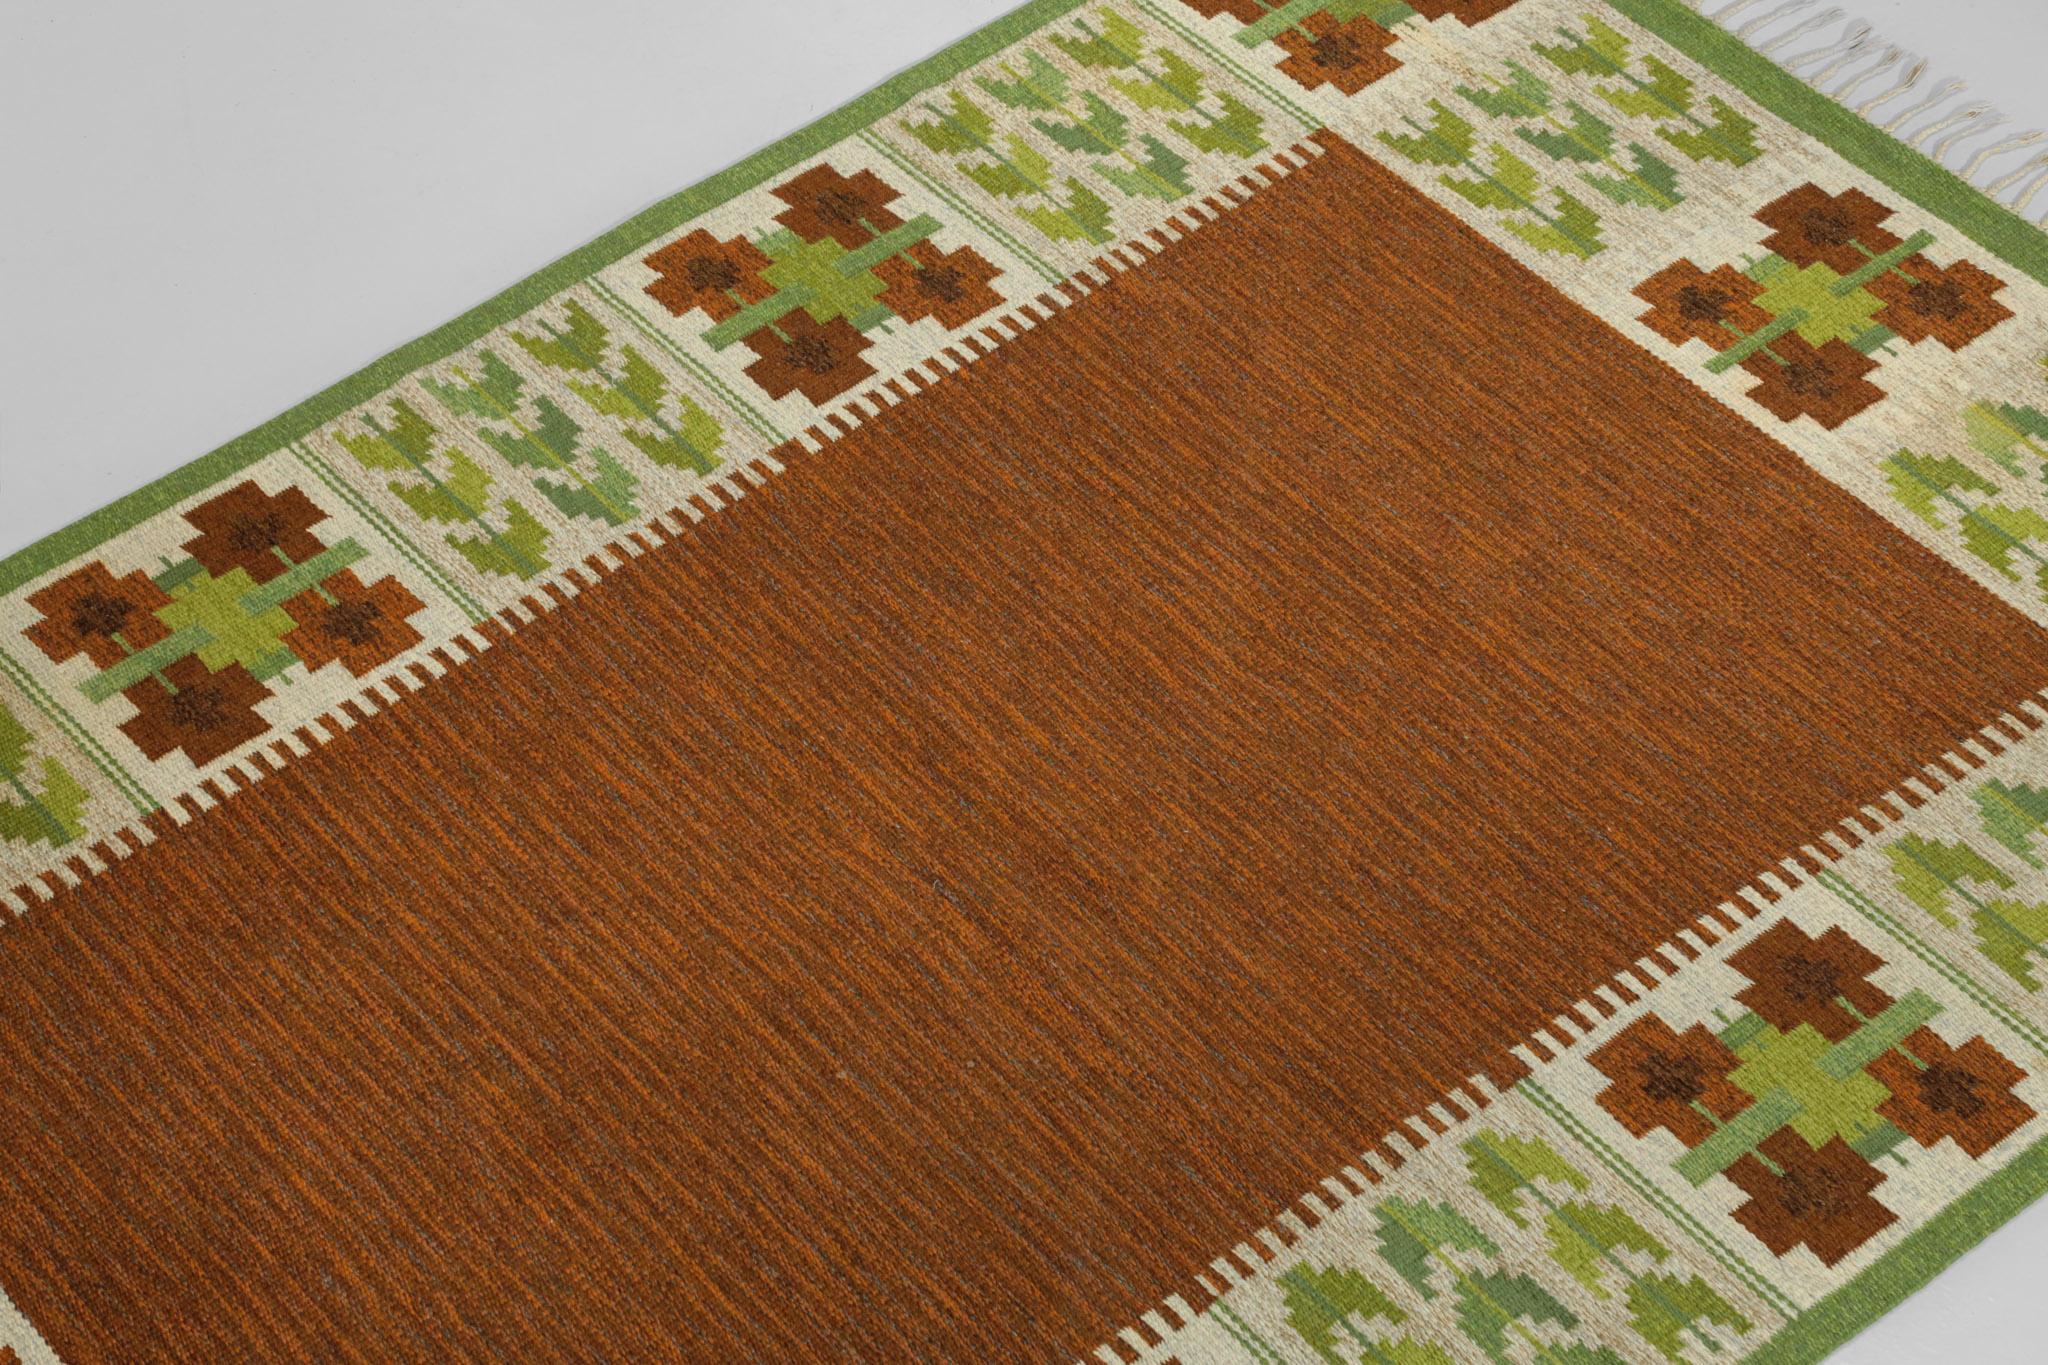 Very large Scandinavian rug from the 60's by the Swedish artist Berit Woelfer. Flat weaving technique (rillakan), wool on linen. Traditional geometrical patterns in green, brown and beige. Handwoven in Sweden in the 50s/60s. Excellent vintage